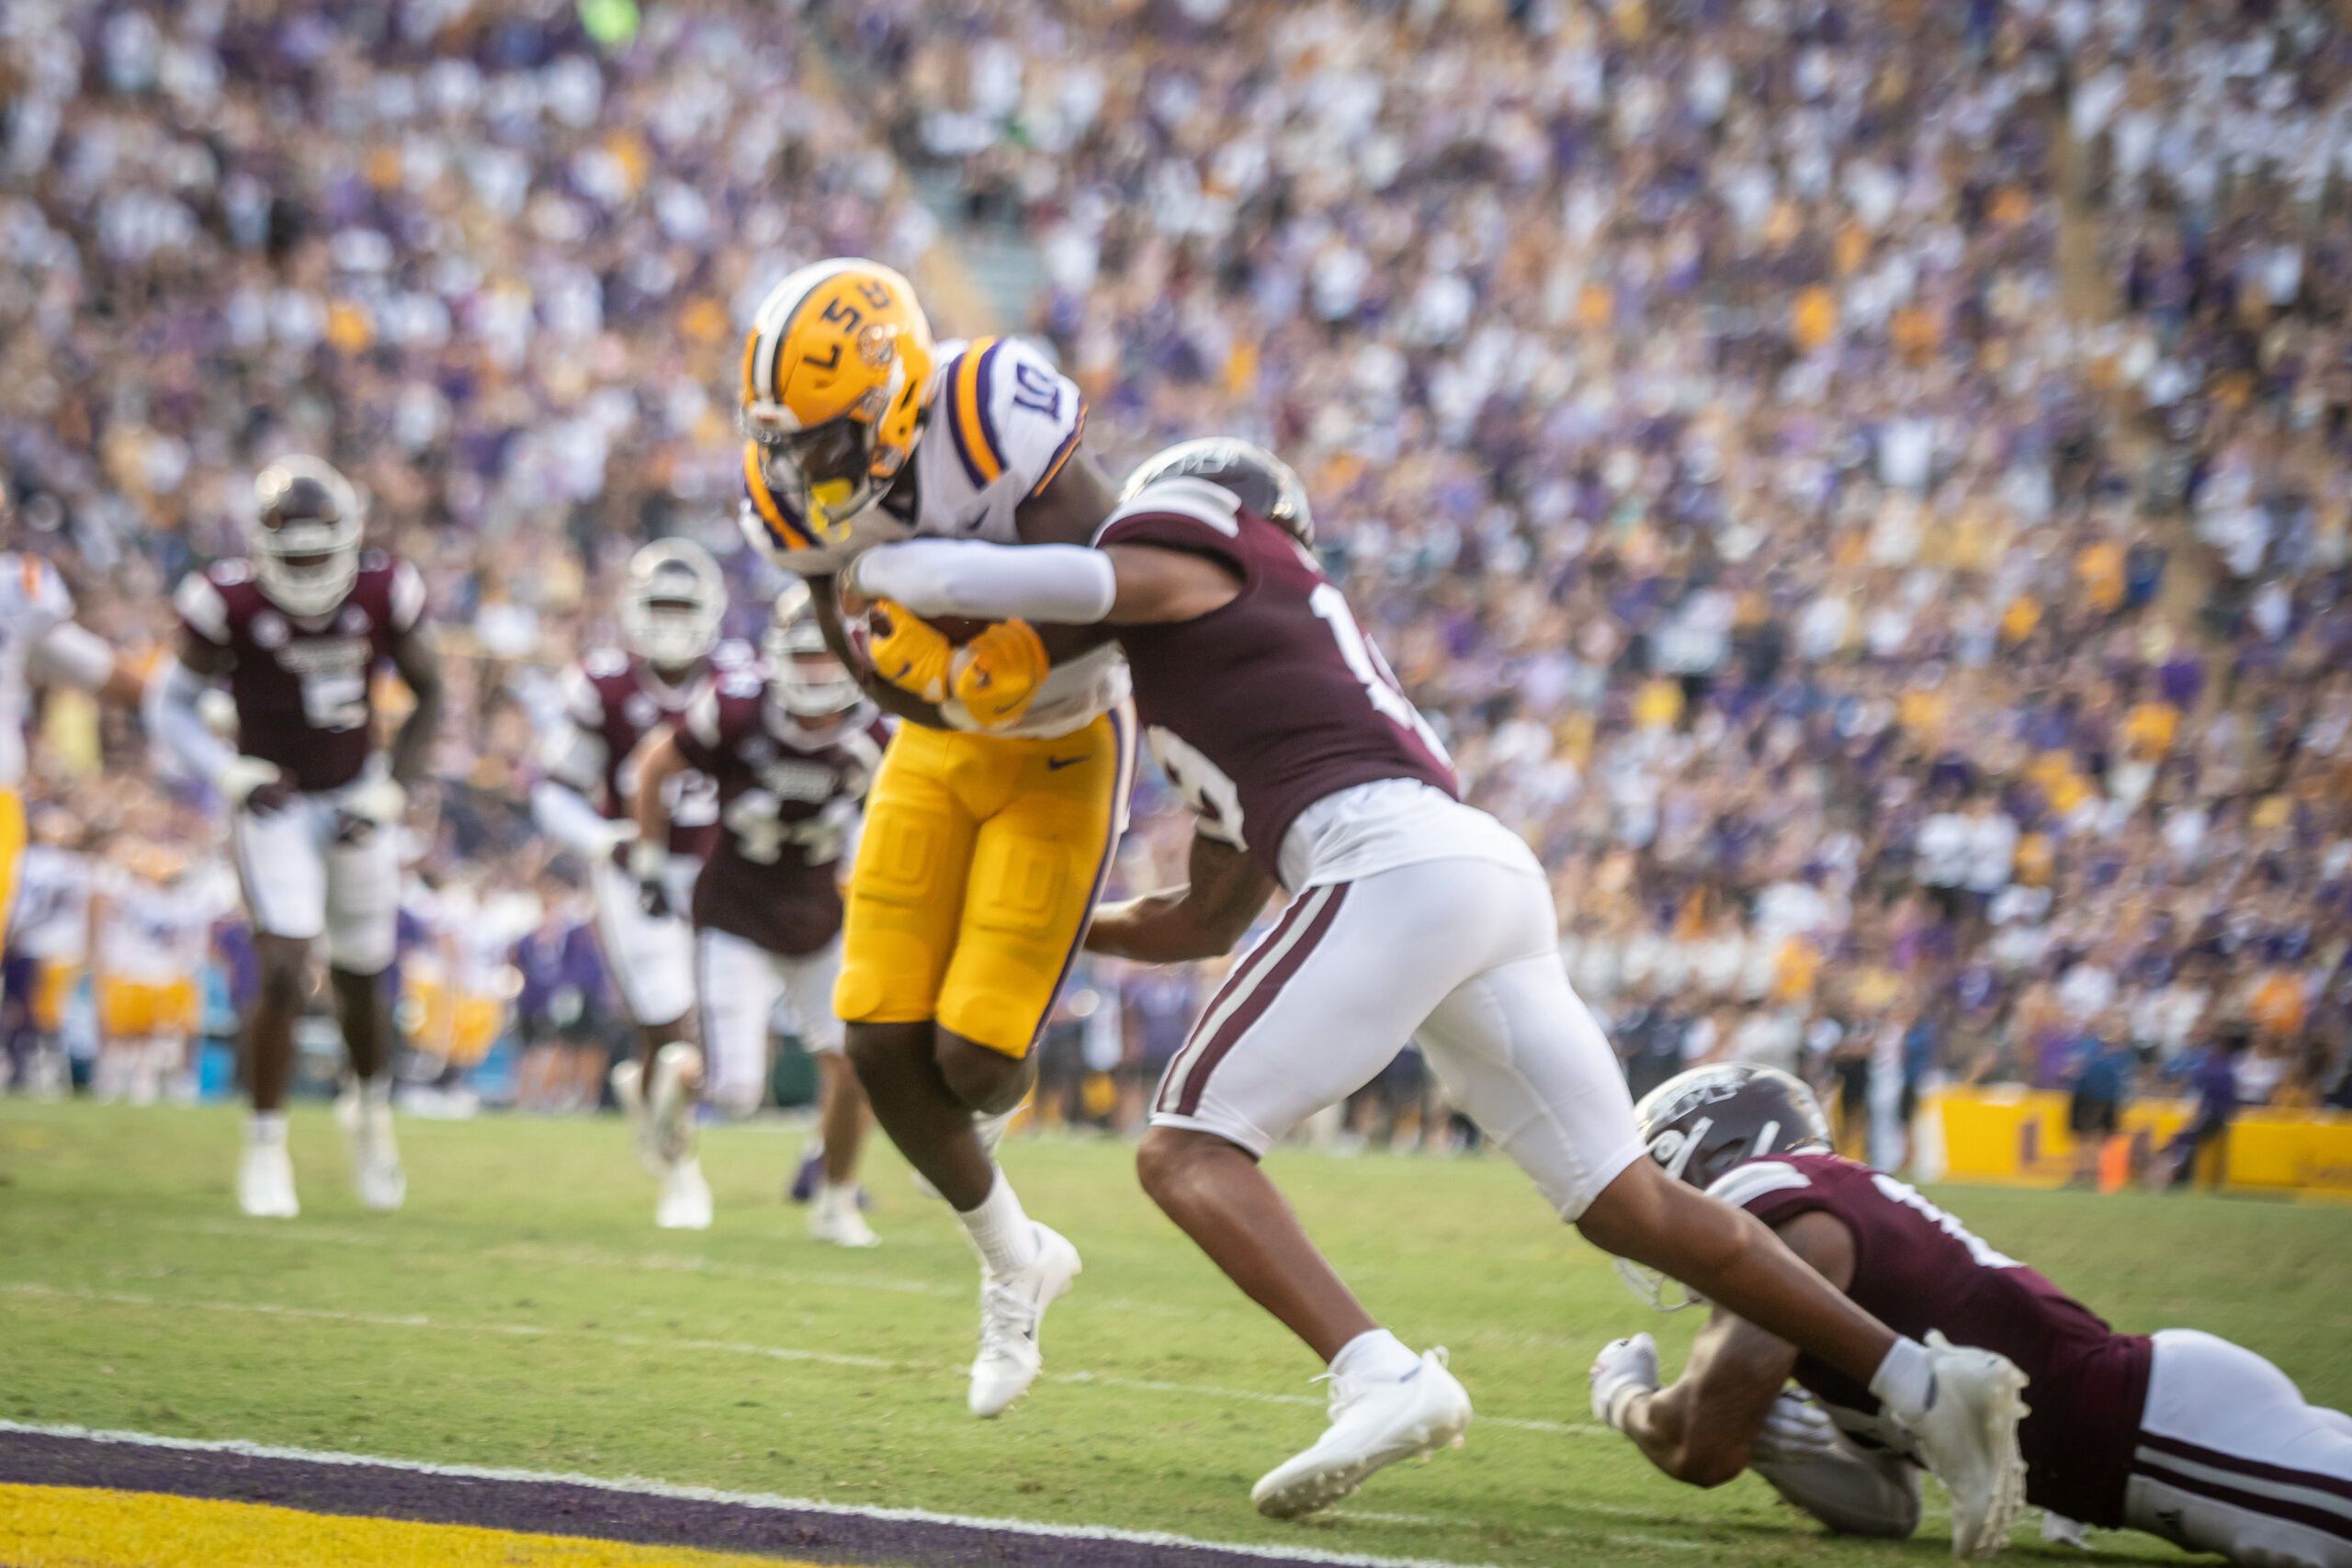 LSU’s Dominant Fourth Quarter Helps The Tigers Clinch First SEC Victory 31-16 Over The Mississippi State Bulldogs.